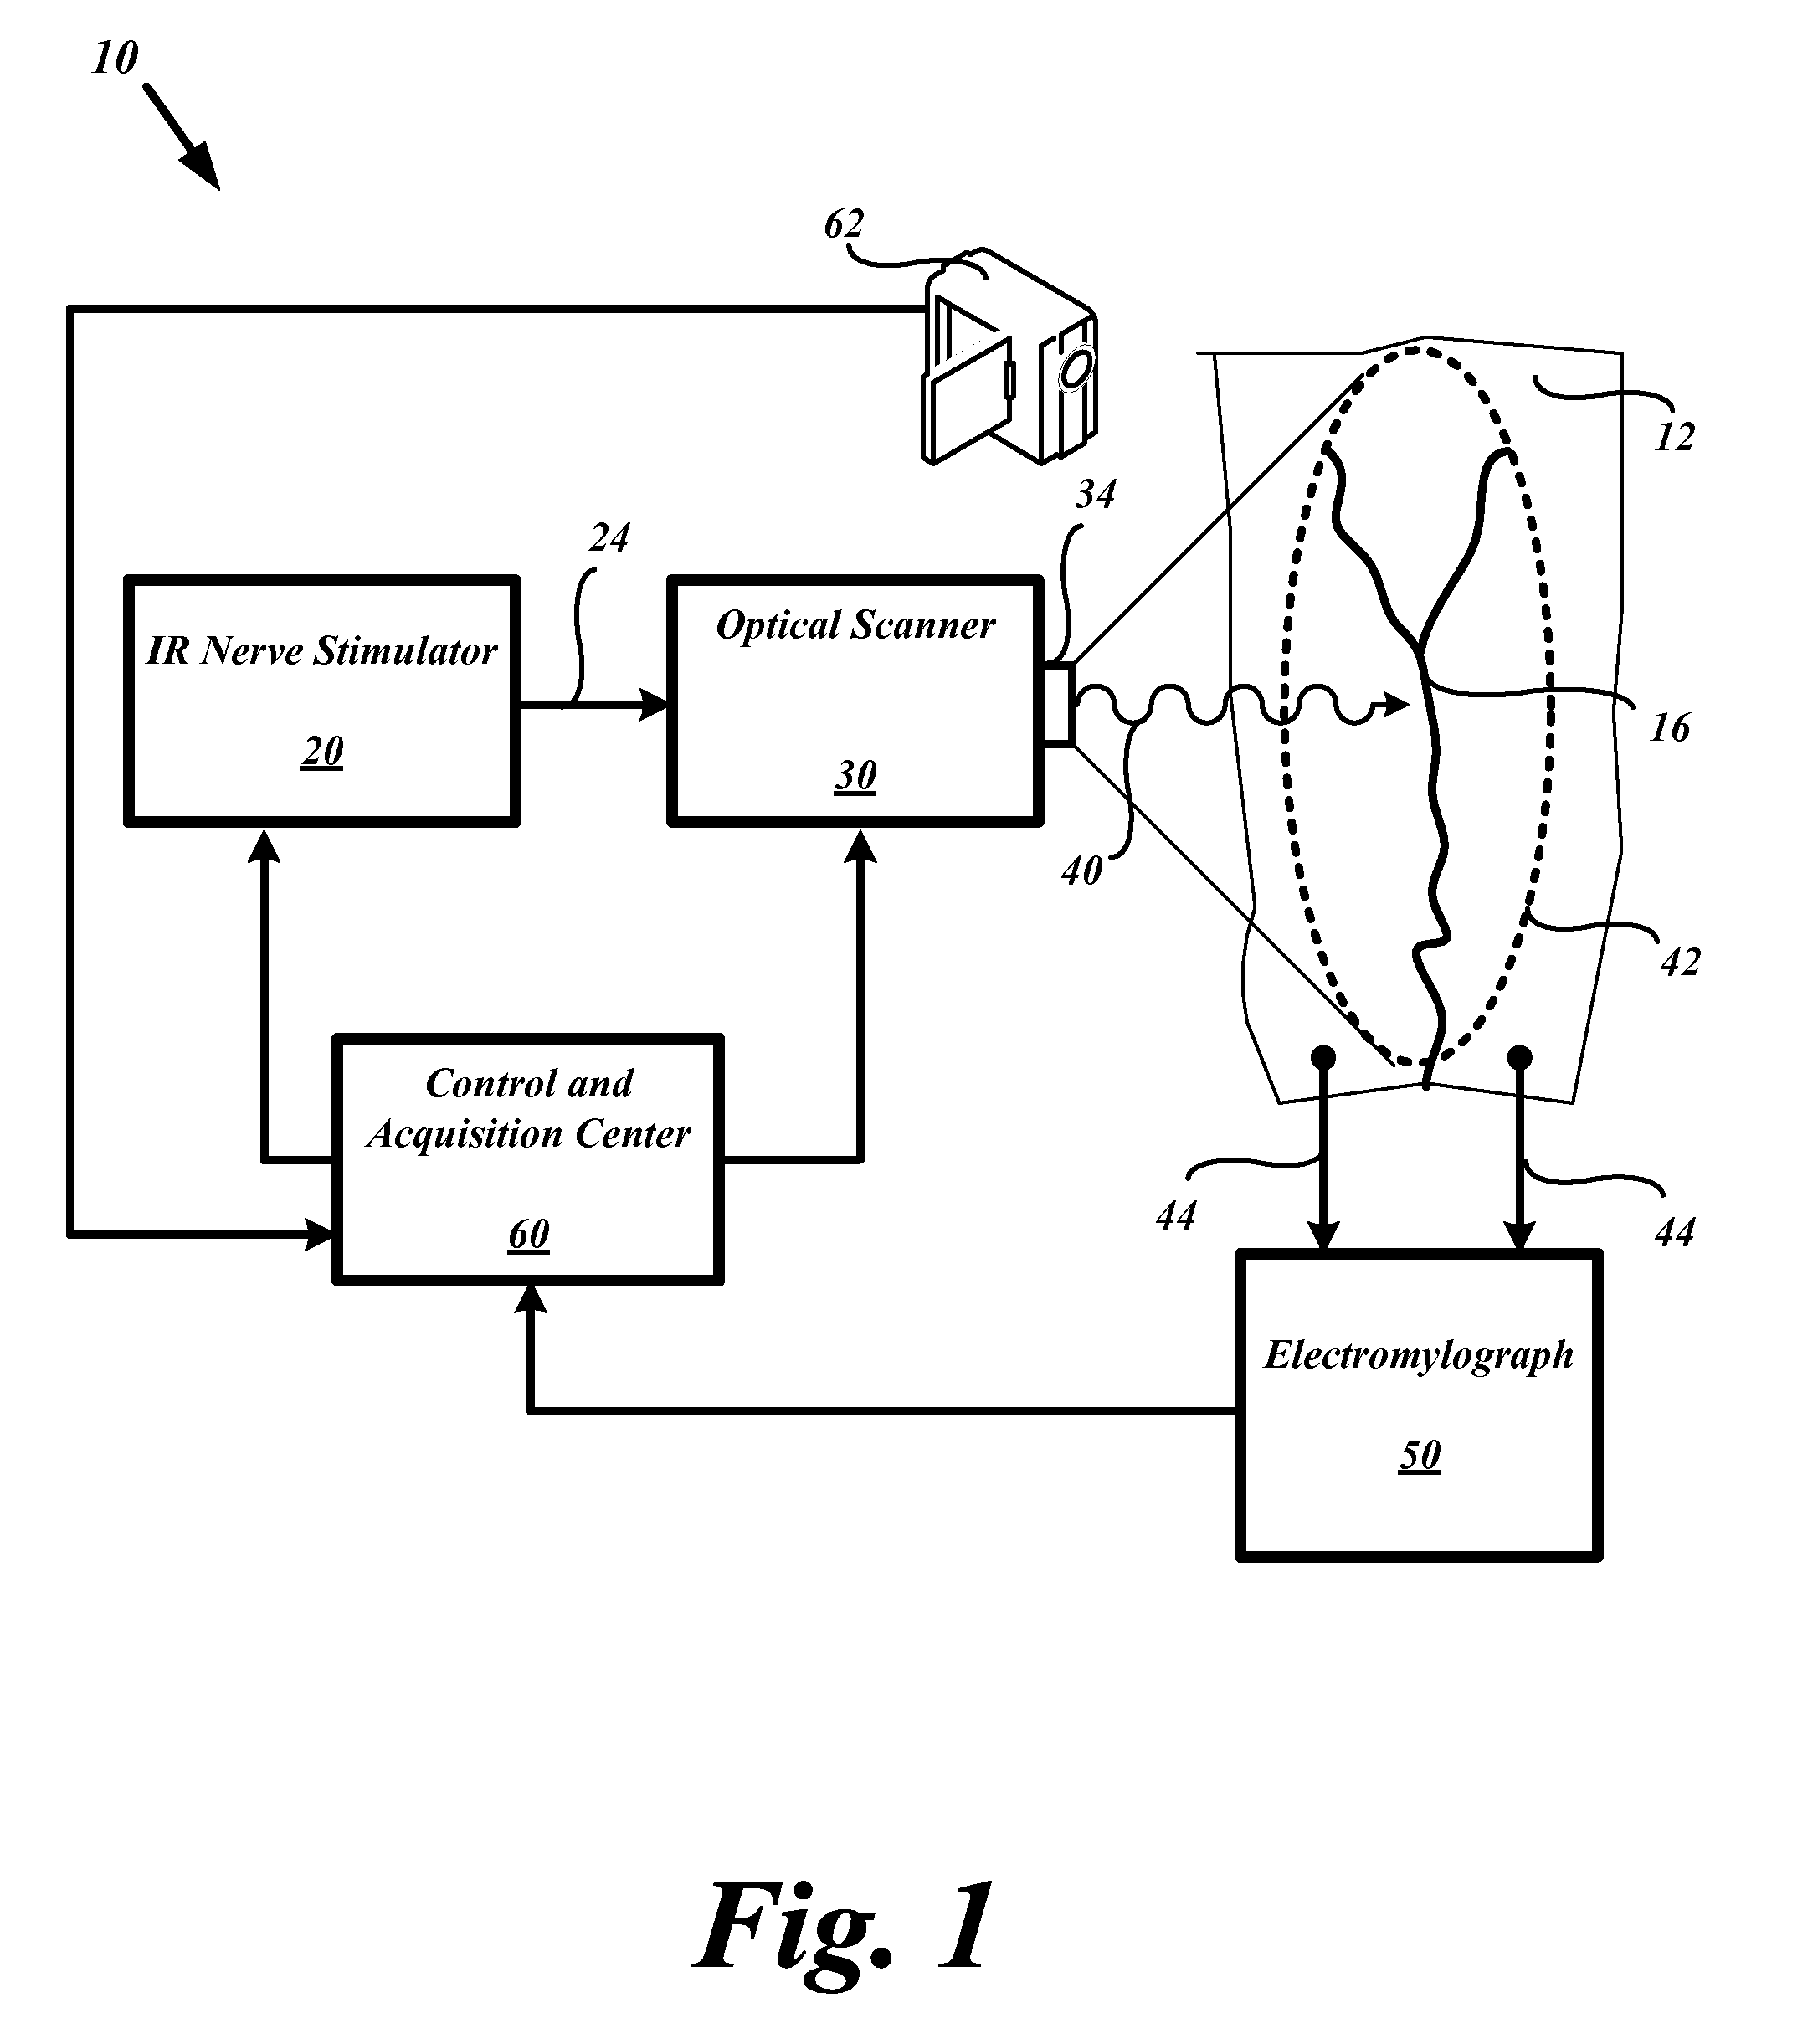 System and methods for nerve response mapping